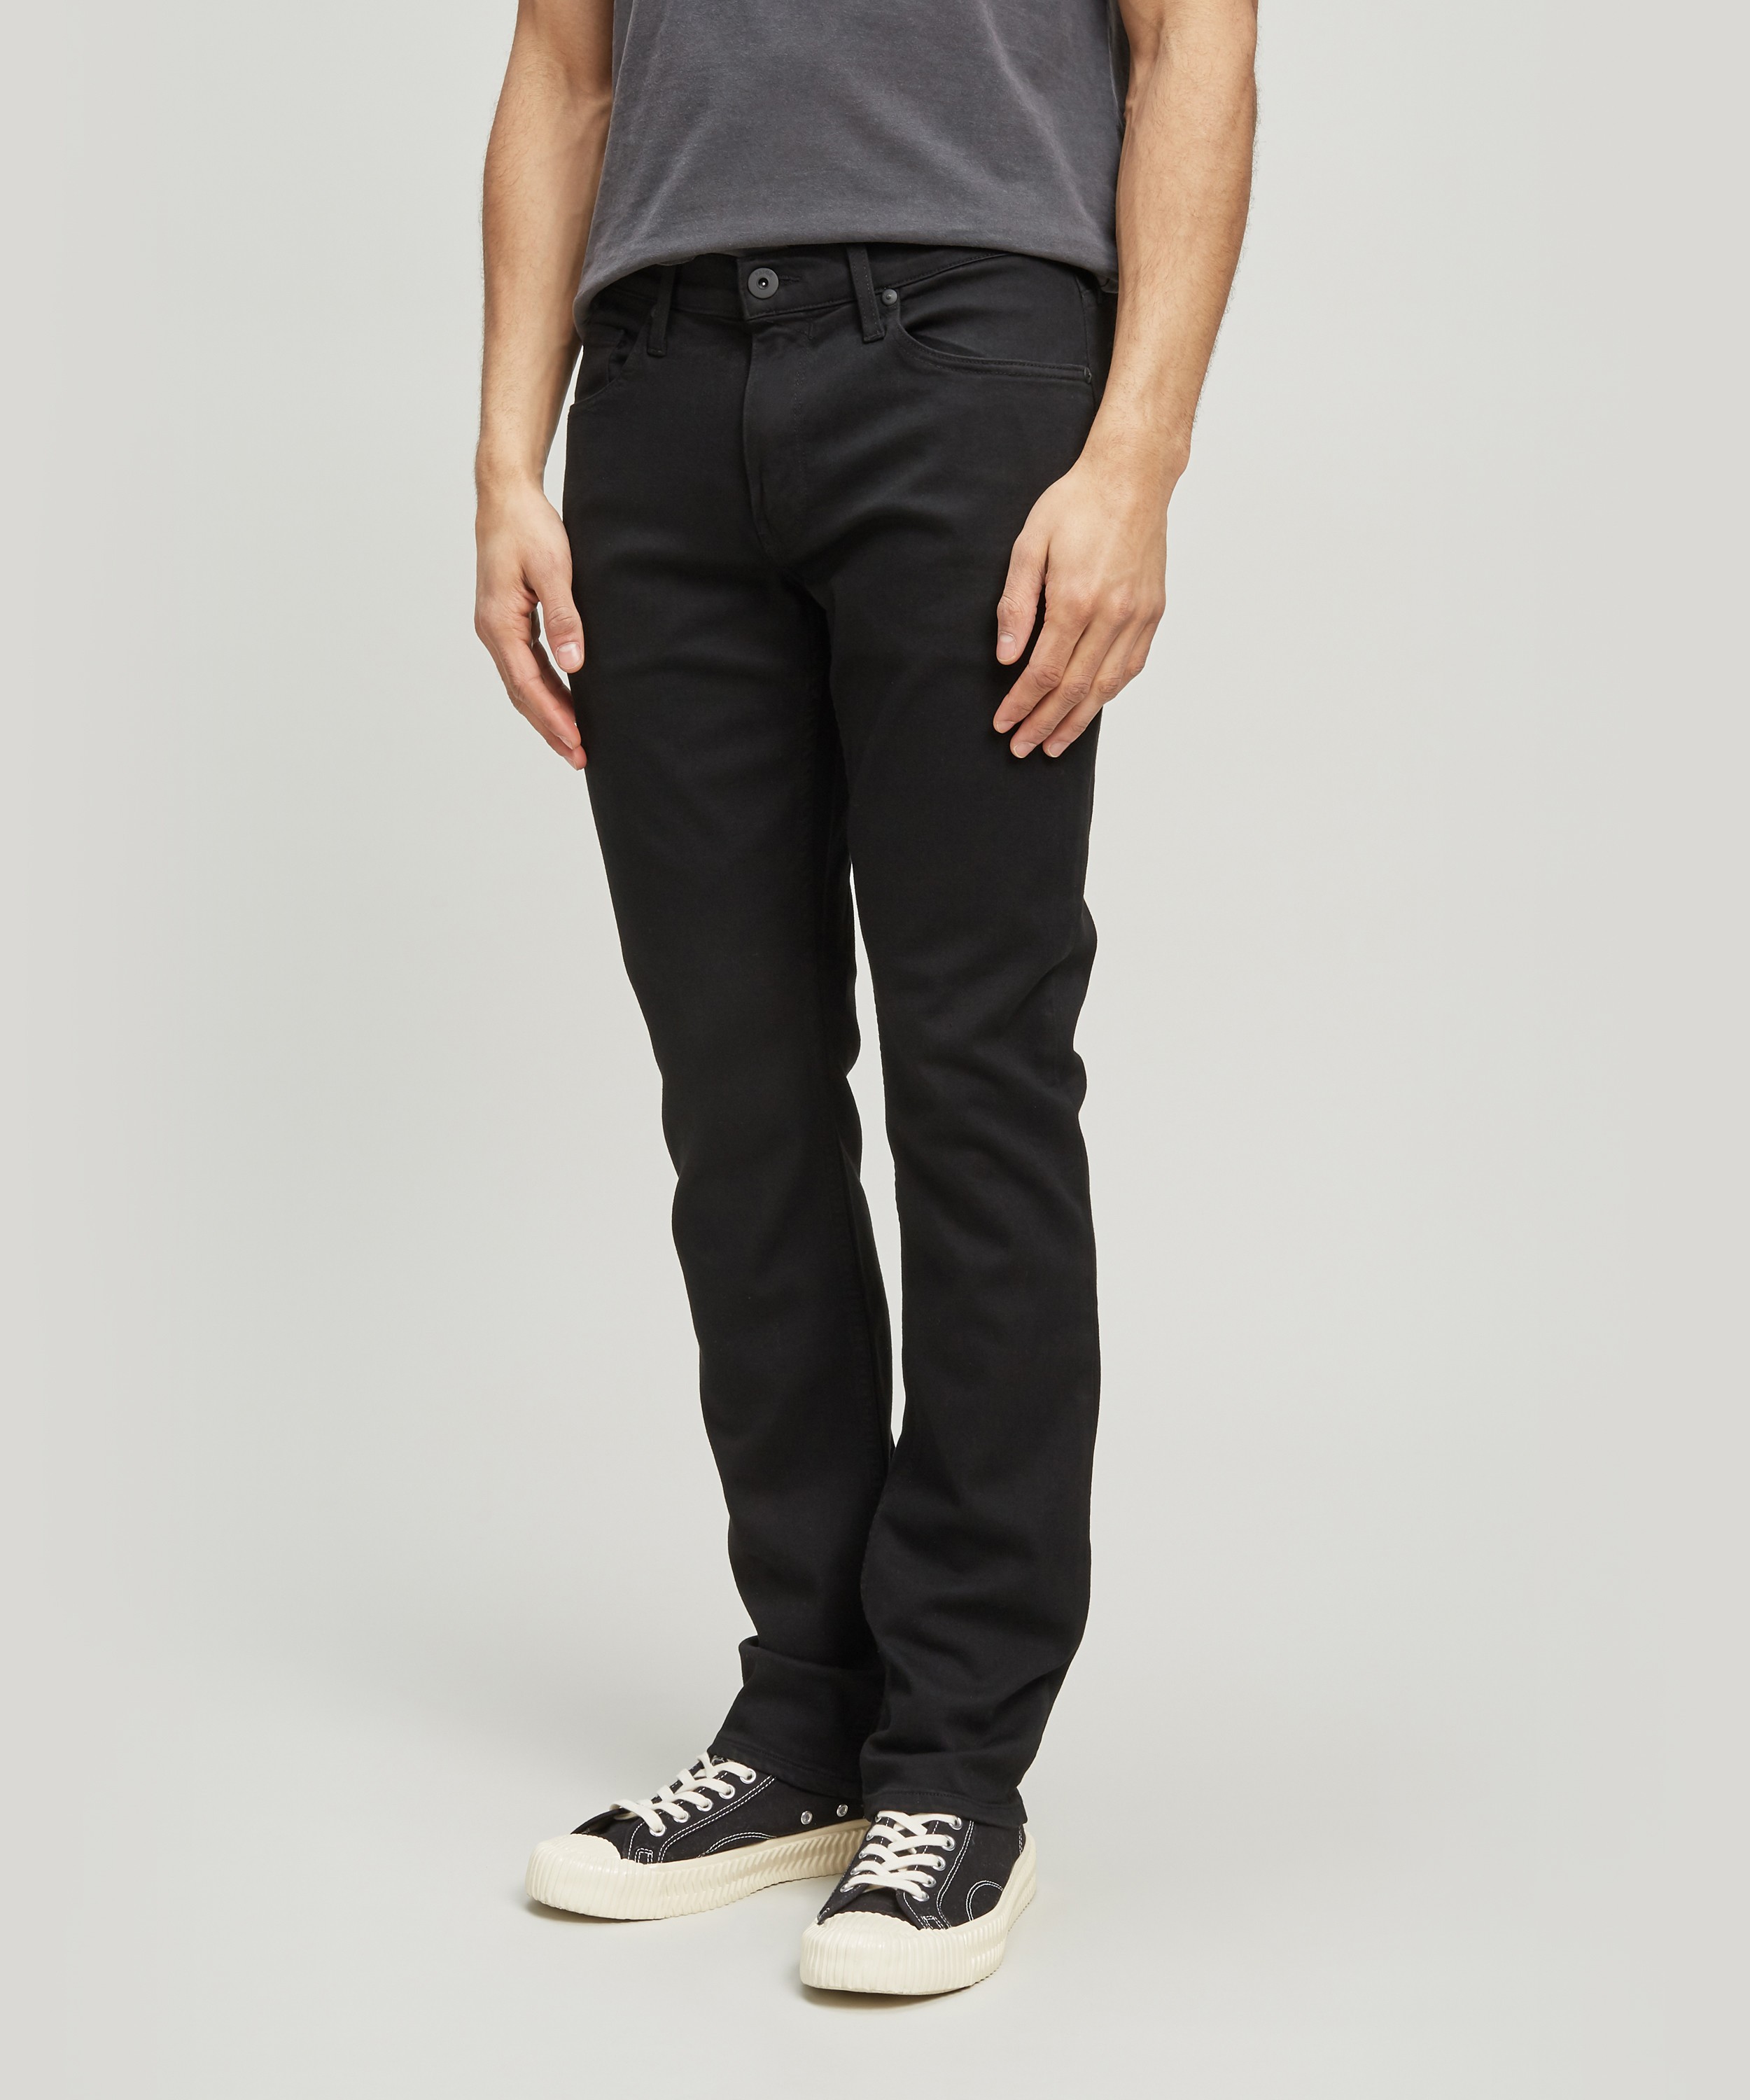 Paige - Federal Slim Straight Fit Black Shadow Jeans image number 0